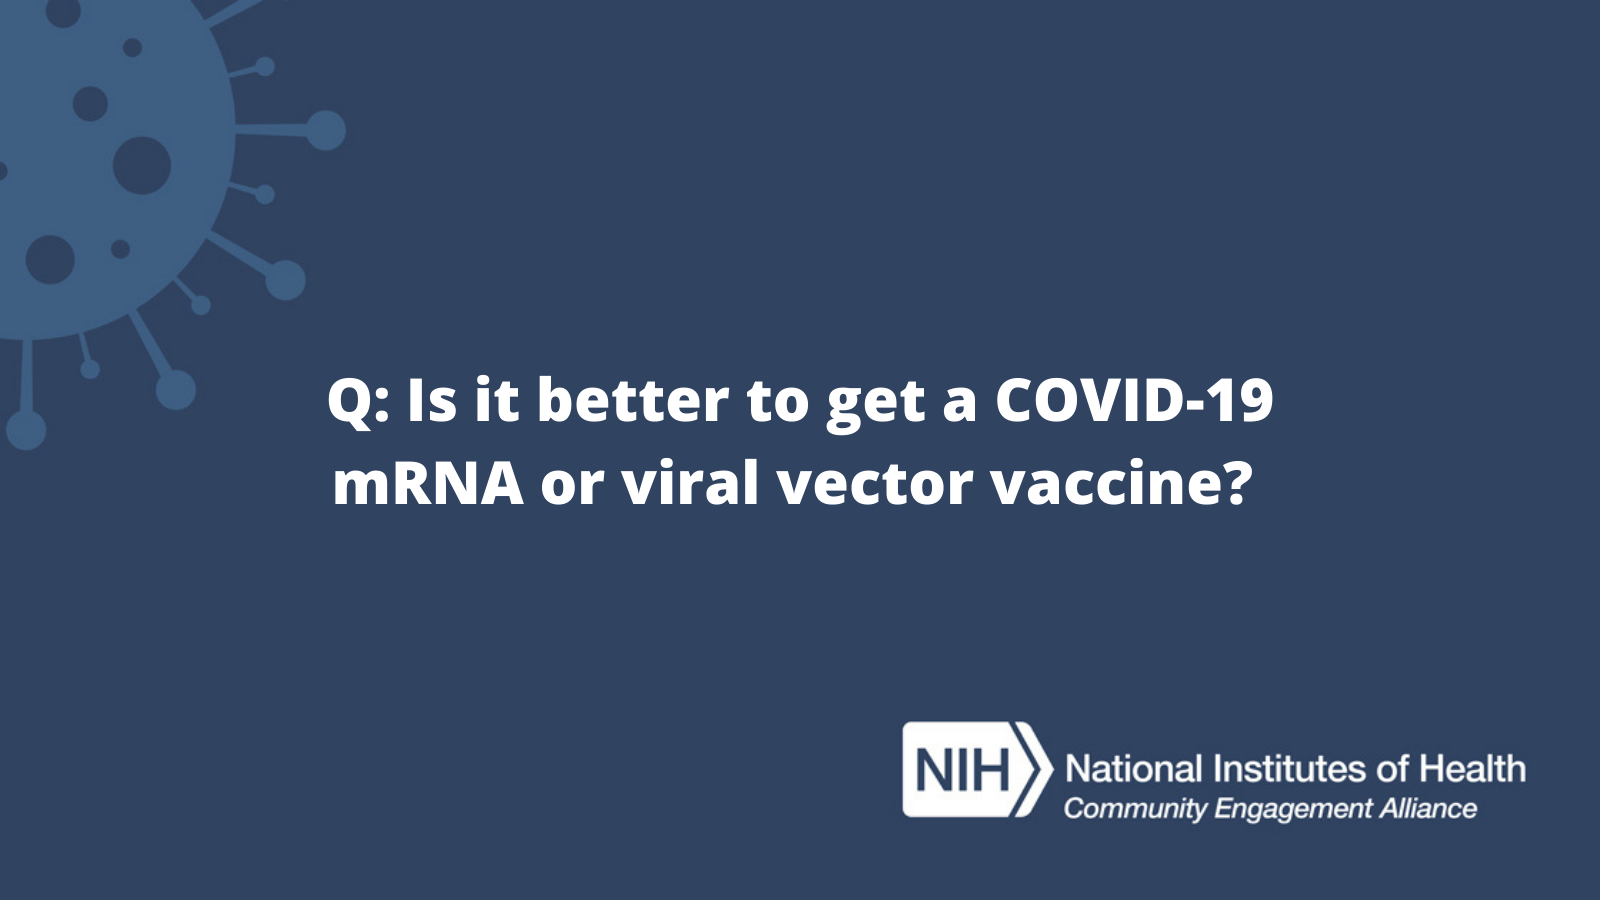 Q: Is it better to get a COVID-19 mRNA or viral vector vaccine?